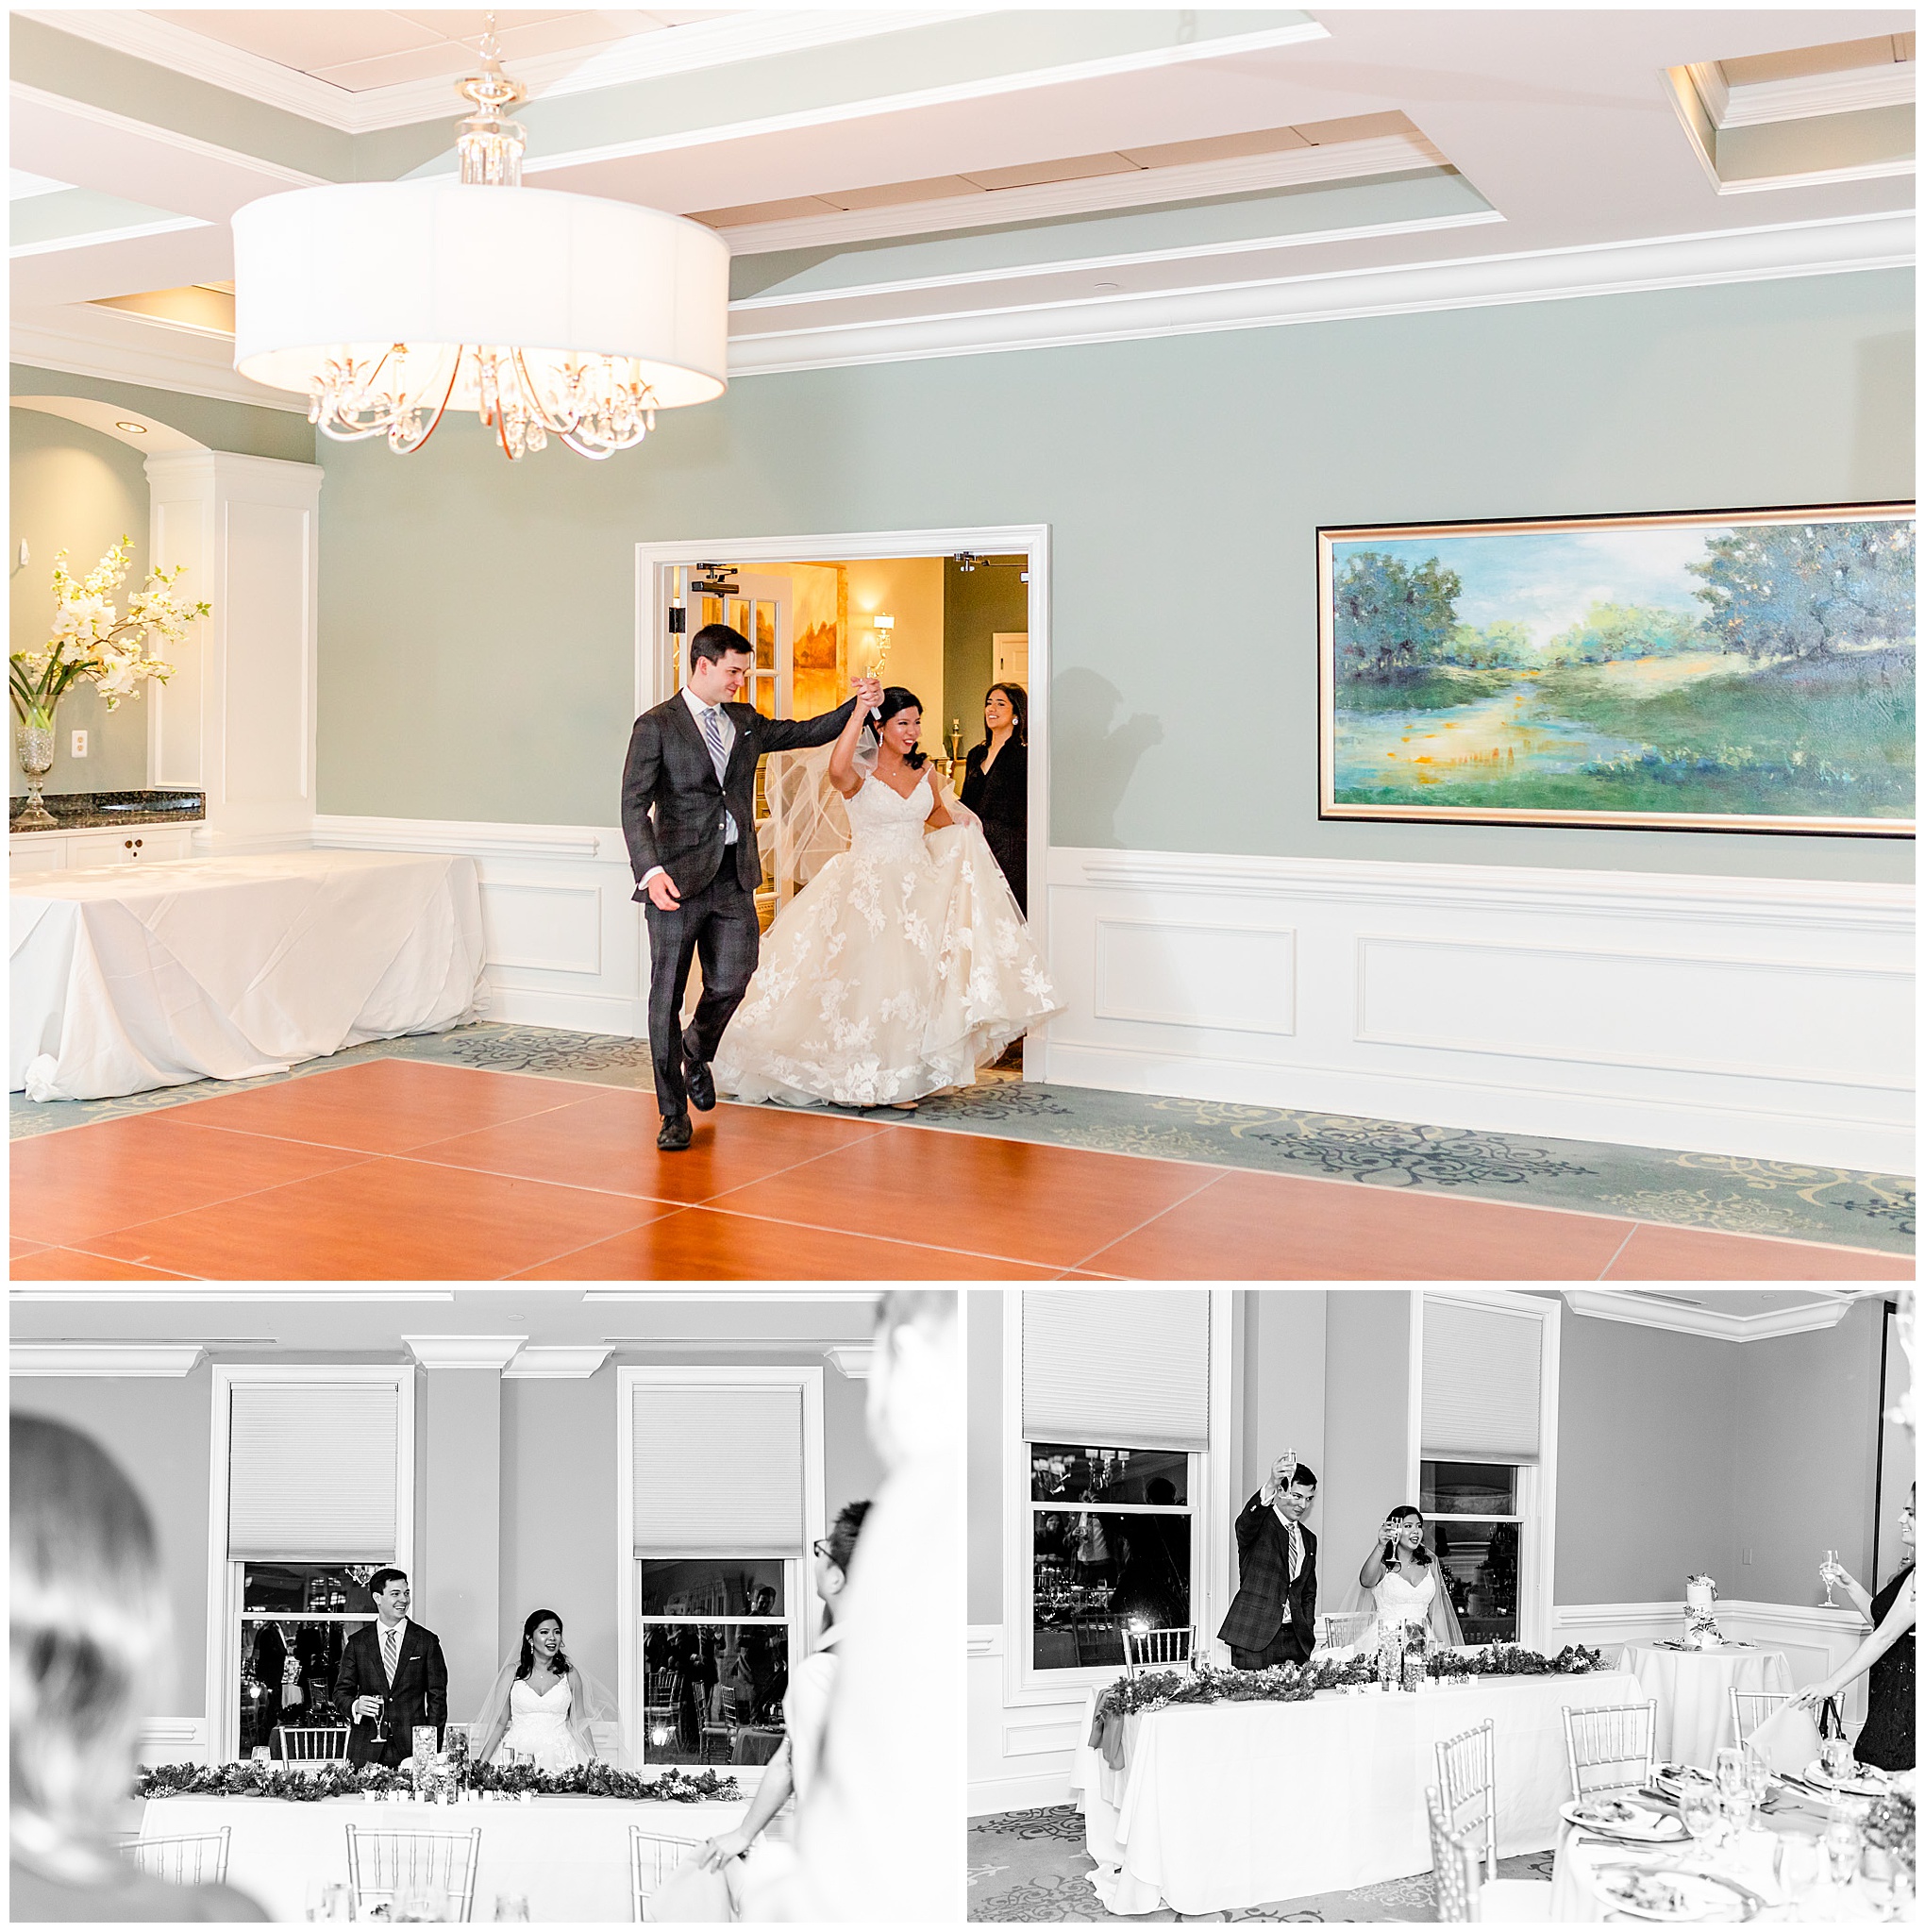 Regency at Dominion Valley wedding, Virginia country club wedding, Haymarket Virginia wedding, northern Virginia wedding, winter wedding, winter wedding aesthetic, DC micro wedding, northern Virginia wedding venues, classic winter wedding, Rachel E.H. Photography, bride and groom entering wedding reception, black and white